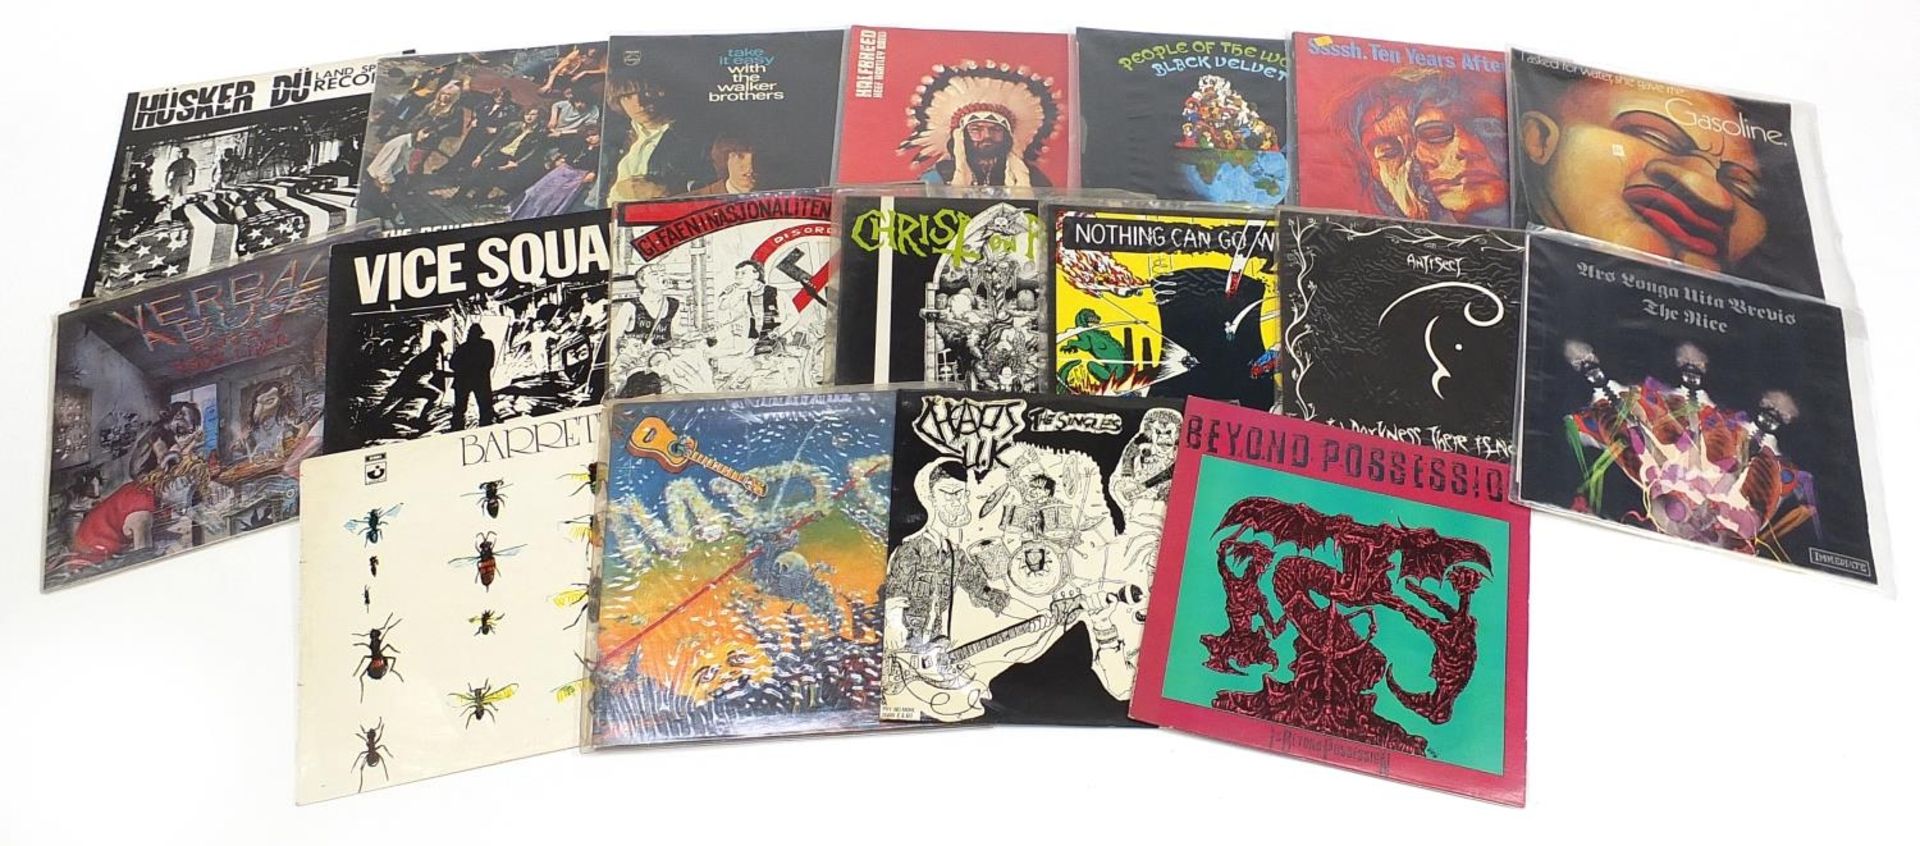 Predominantly rock vinyl LPs including Vice Squad, Syd Barrett and Beyond Possession